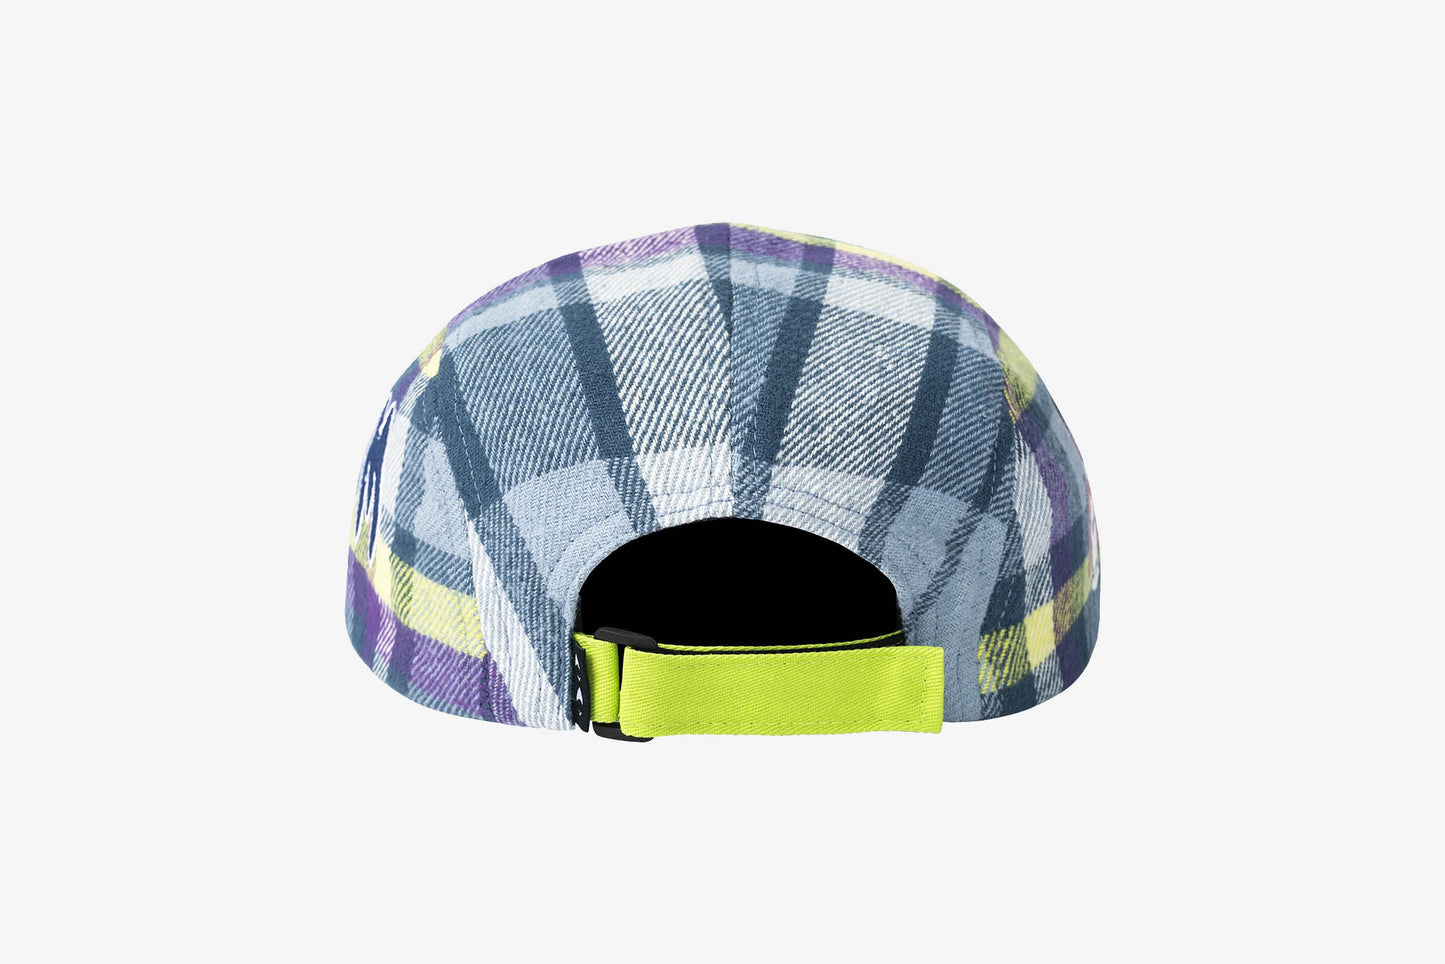 Real Bad Man " Work Flannel" 4 Panel Hat - Blue / Green